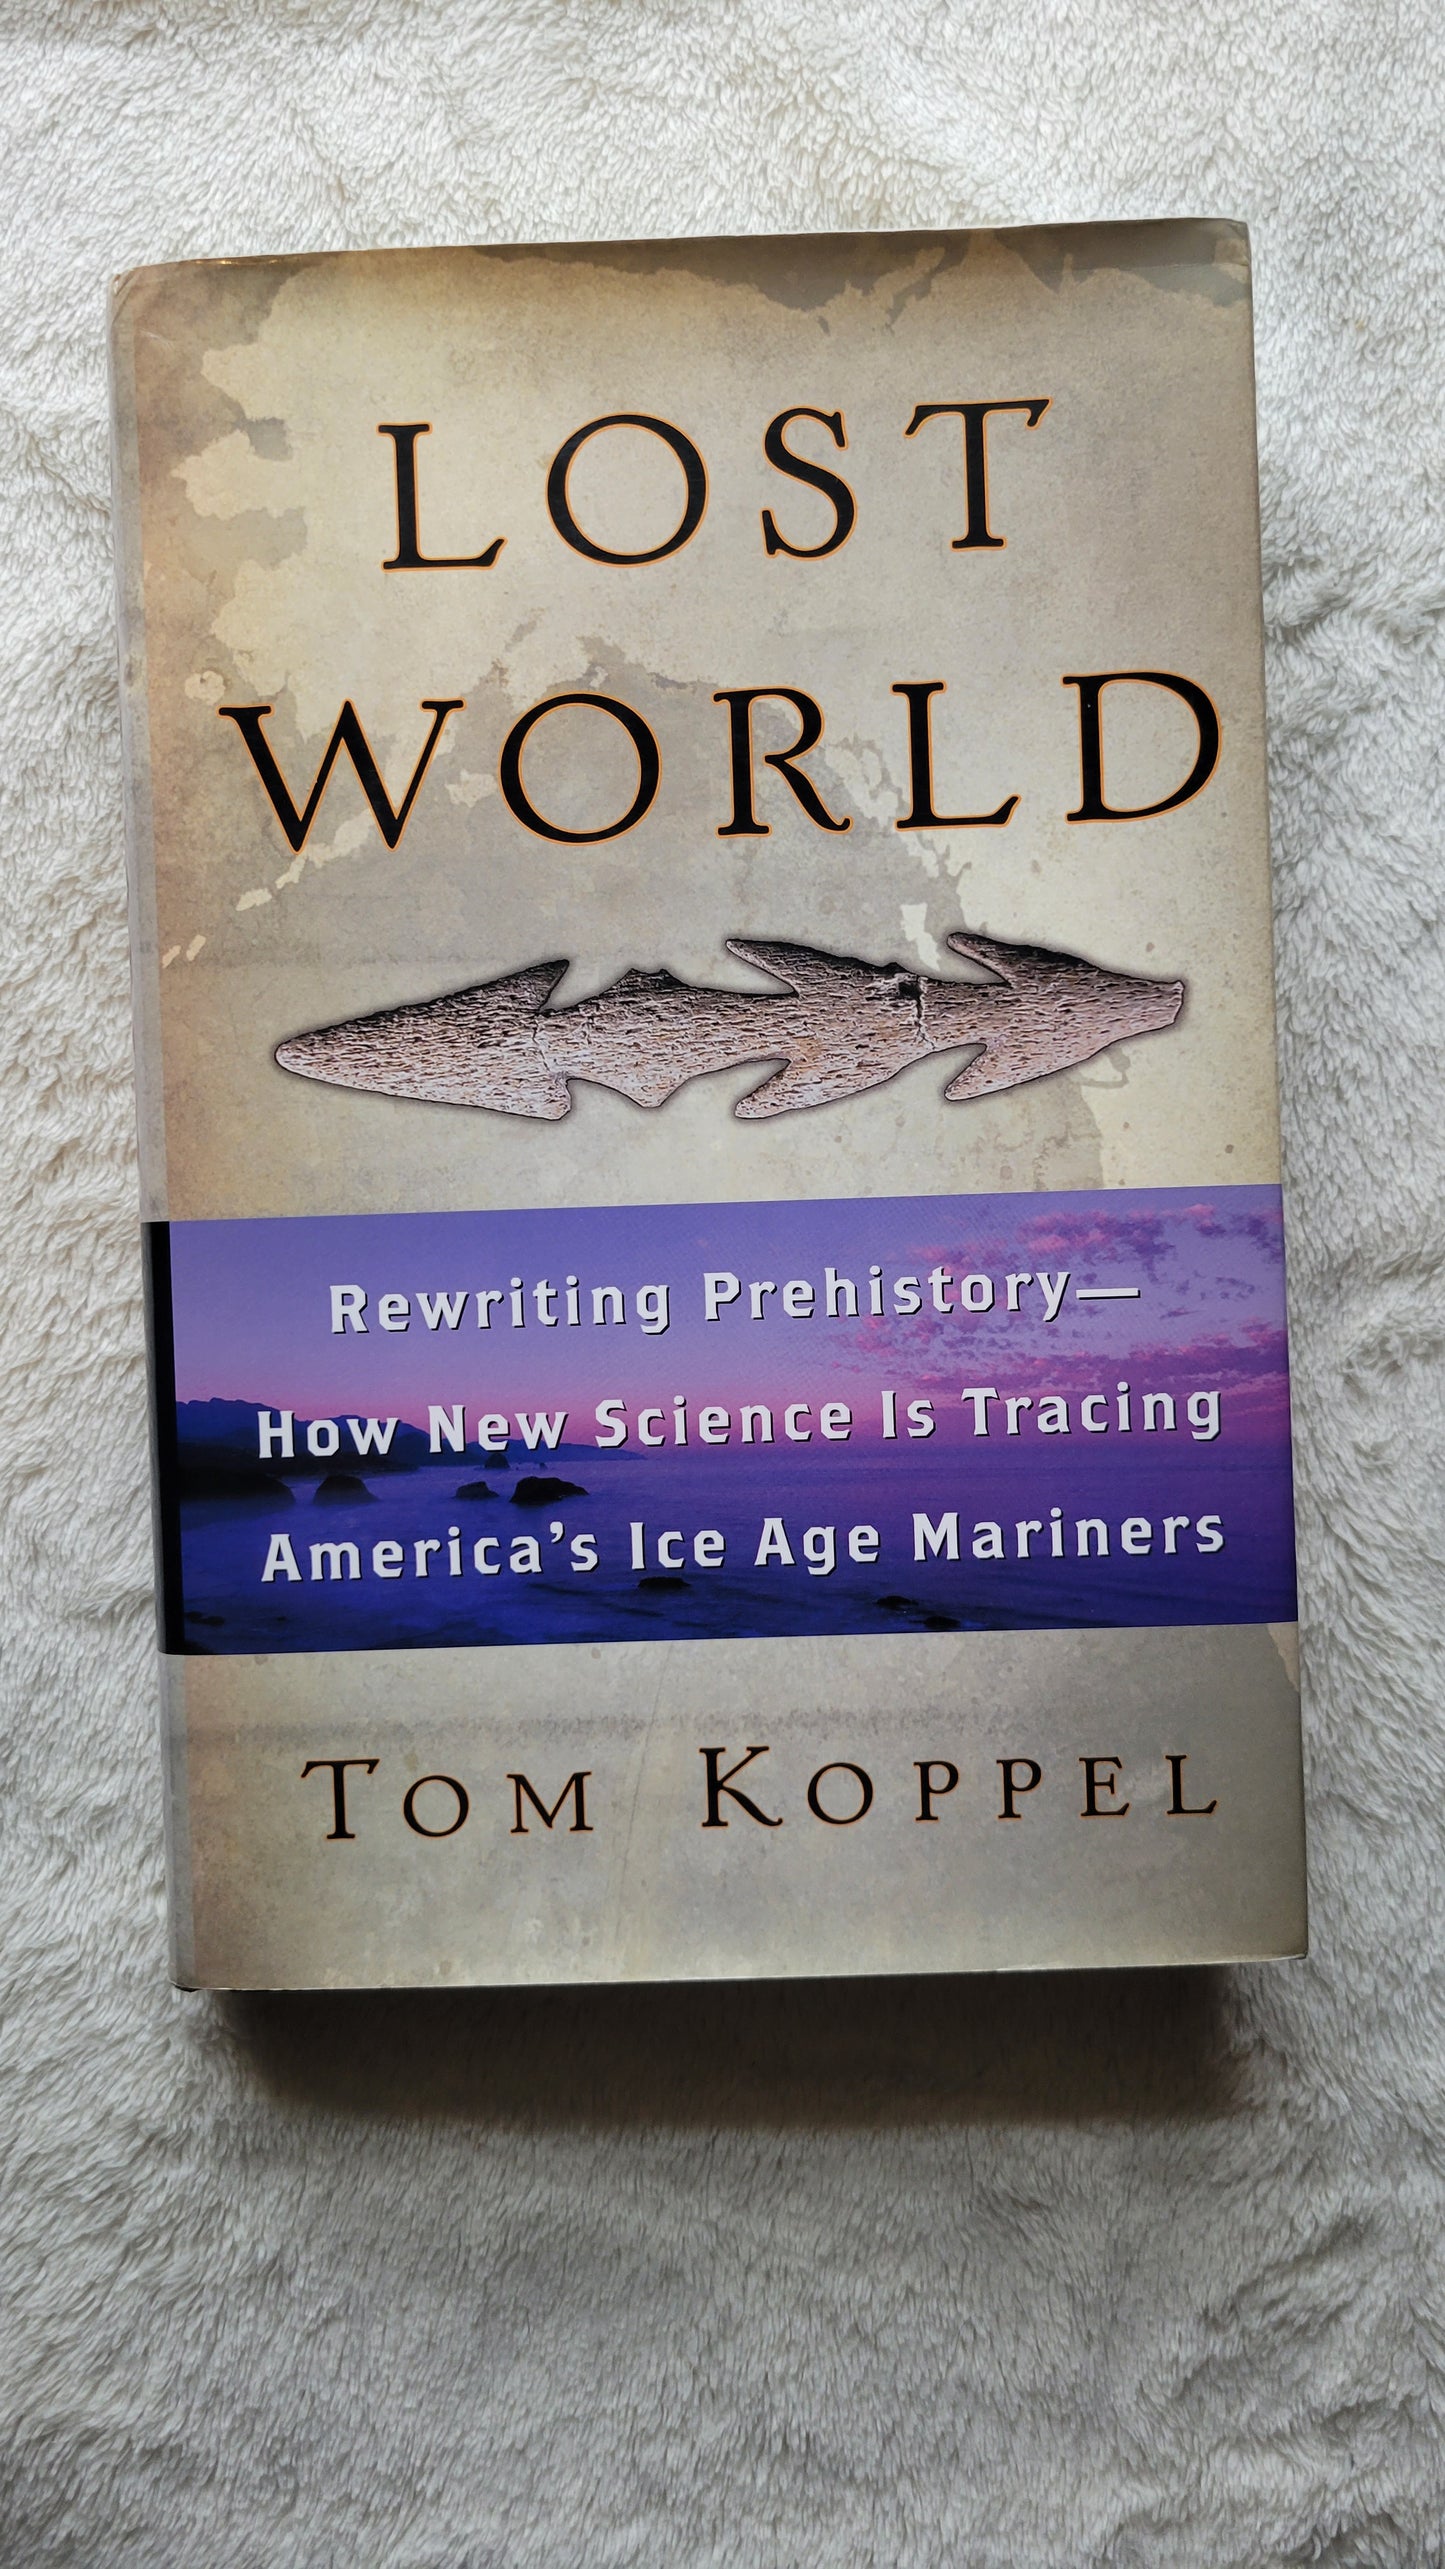 Used book for sale, "Lost World: Rewriting Prehistory – How New Science is Tracing America’s Ice Age Mariners" written by Tom Koppel, published by Atria Books, 2010. View of front cover.  